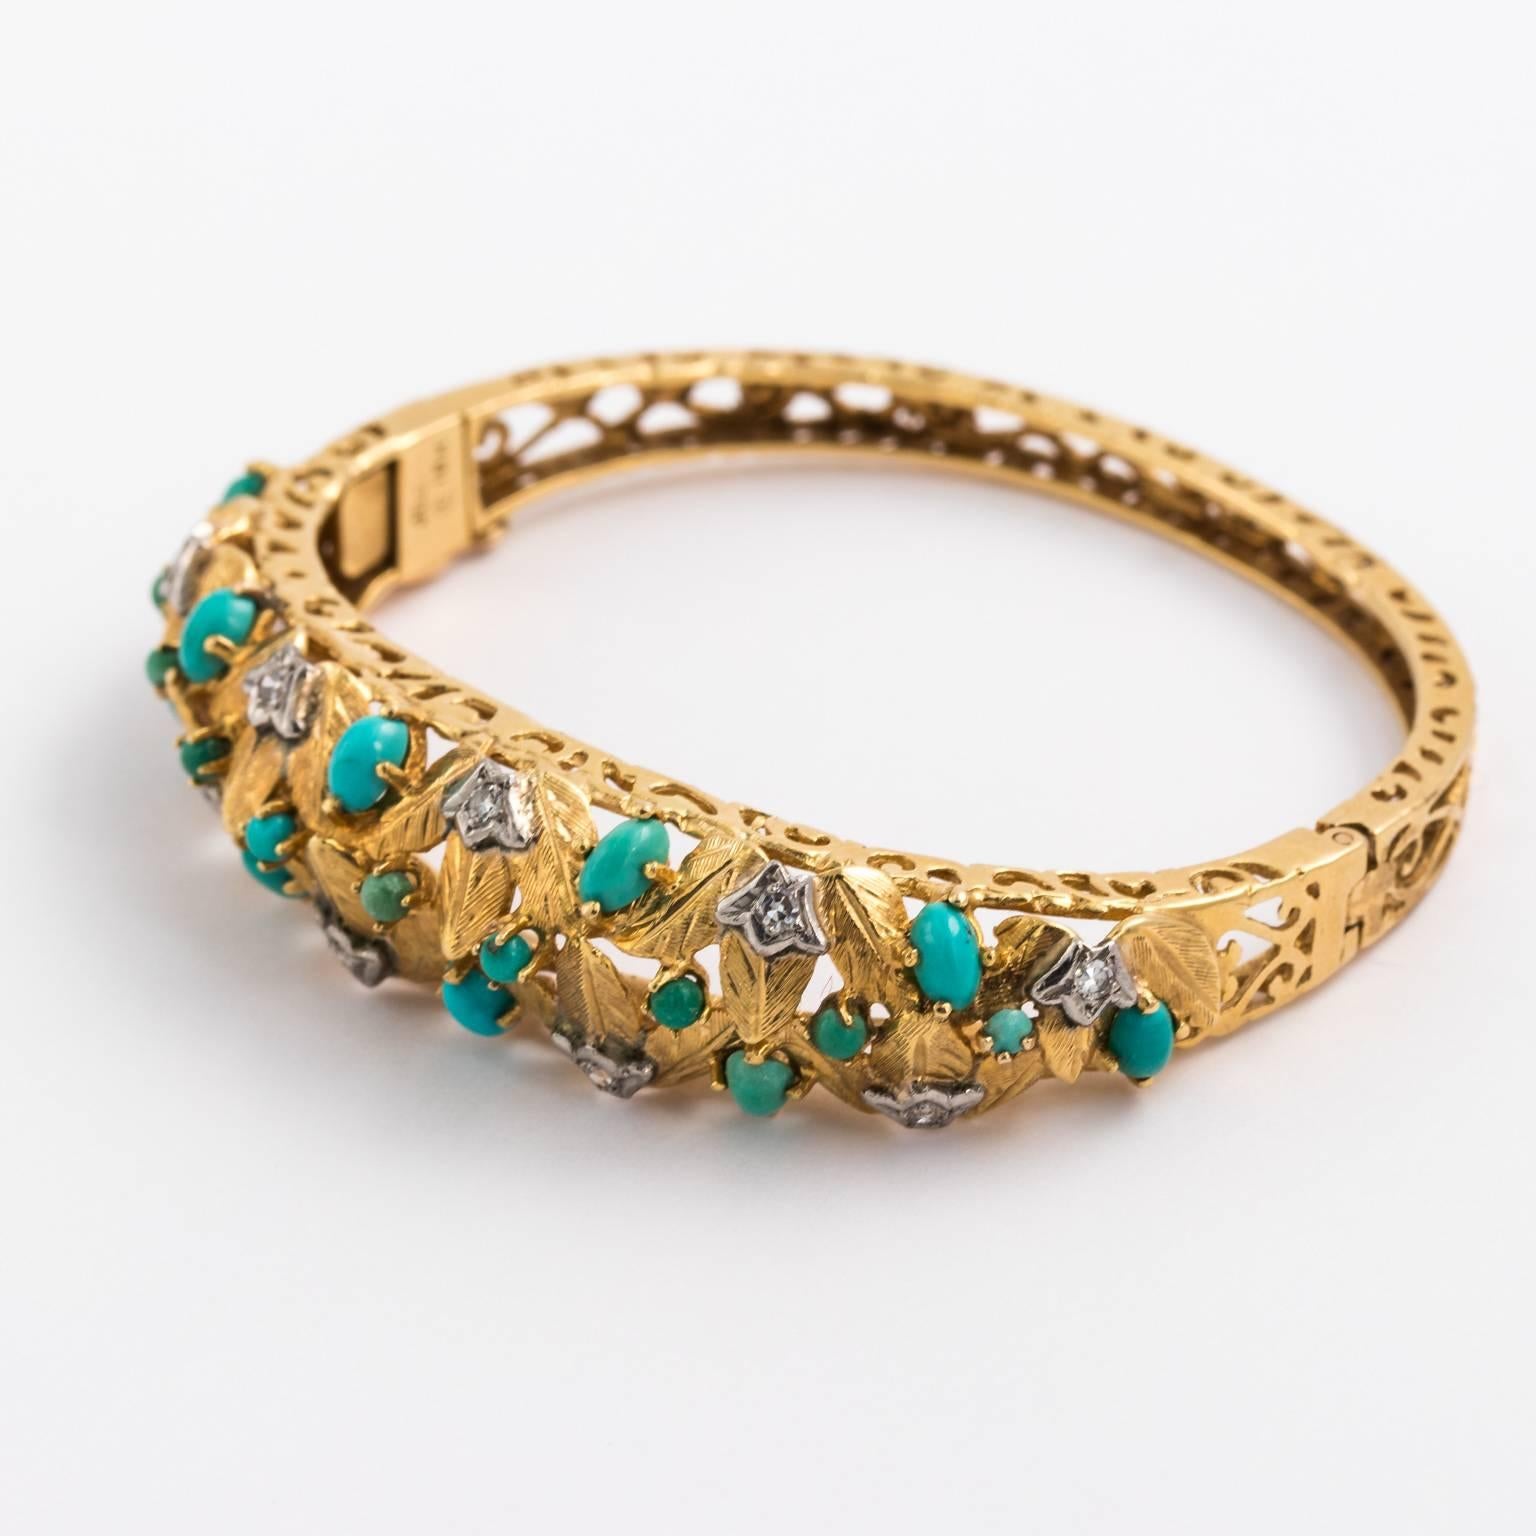 Women's Gold and Turquoise Cuff Bracelet